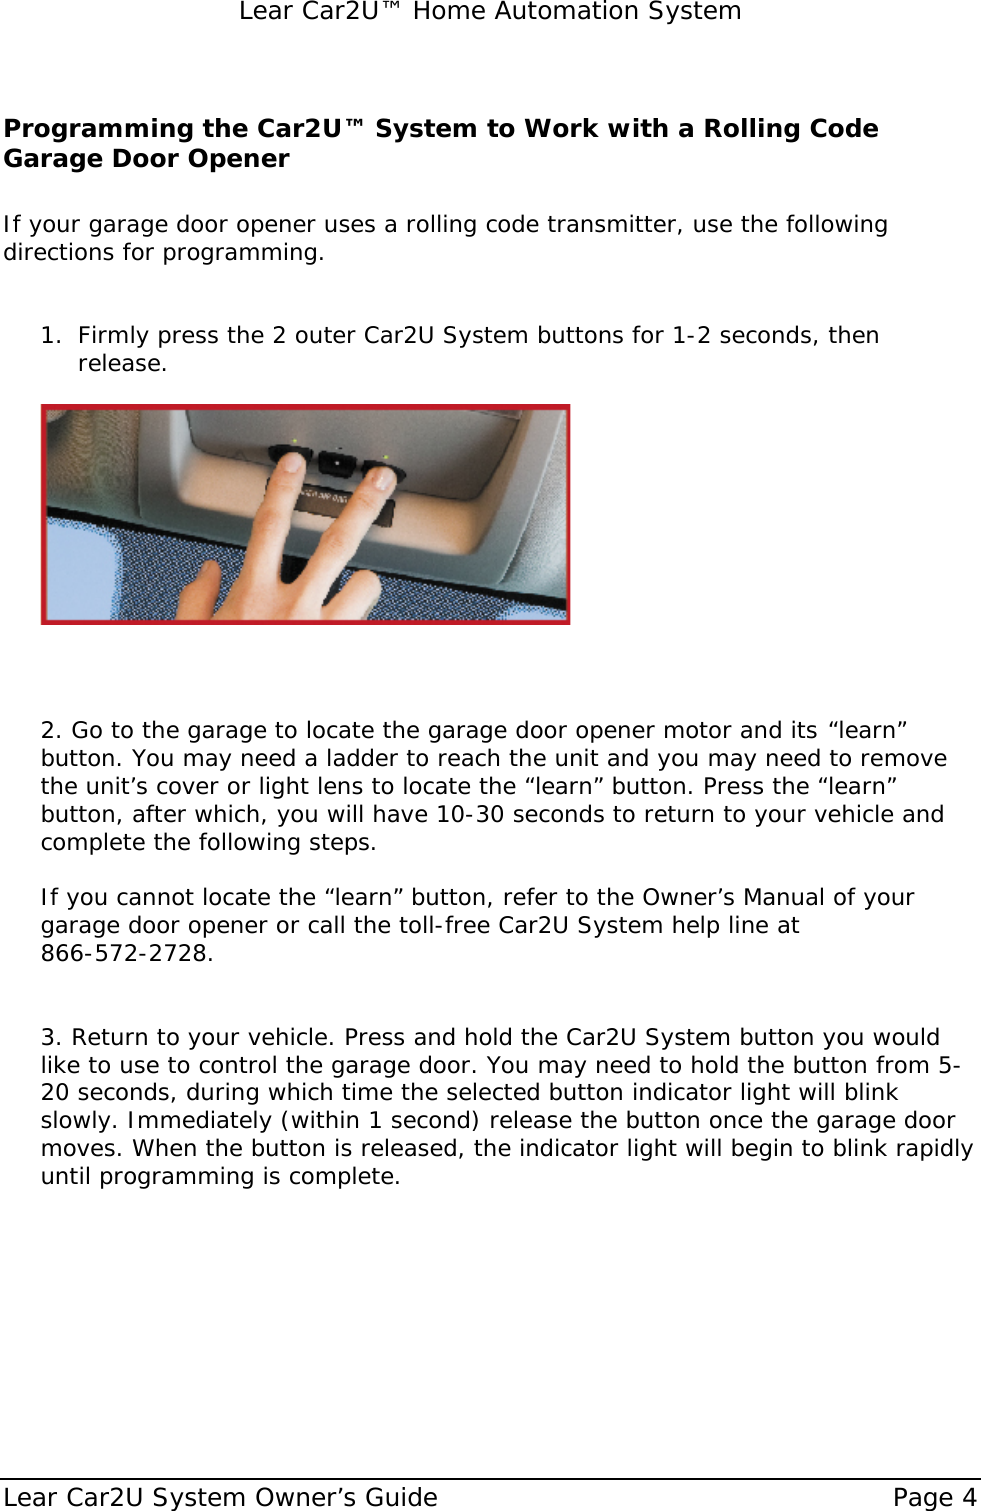   Lear Car2U™ Home Automation System Lear Car2U System Owner’s Guide    Page 4   Programming the Car2U™ System to Work with a Rolling Code Garage Door Opener  If your garage door opener uses a rolling code transmitter, use the following directions for programming.   1. Firmly press the 2 outer Car2U System buttons for 1-2 seconds, then release.      2. Go to the garage to locate the garage door opener motor and its  “learn” button. You may need a ladder to reach the unit and you may need to remove the unit’s cover or light lens to locate the “learn” button. Press the “learn” button, after which, you will have 10-30 seconds to return to your vehicle and complete the following steps.  If you cannot locate the “learn” button, refer to the Owner’s Manual of your garage door opener or call the toll-free Car2U System help line at    866-572-2728.   3. Return to your vehicle. Press and hold the Car2U System button you would like to use to control the garage door. You may need to hold the button from 5-20 seconds, during which time the selected button indicator light will blink slowly. Immediately (within 1 second) release the button once the garage door moves. When the button is released, the indicator light will begin to blink rapidly until programming is complete.      